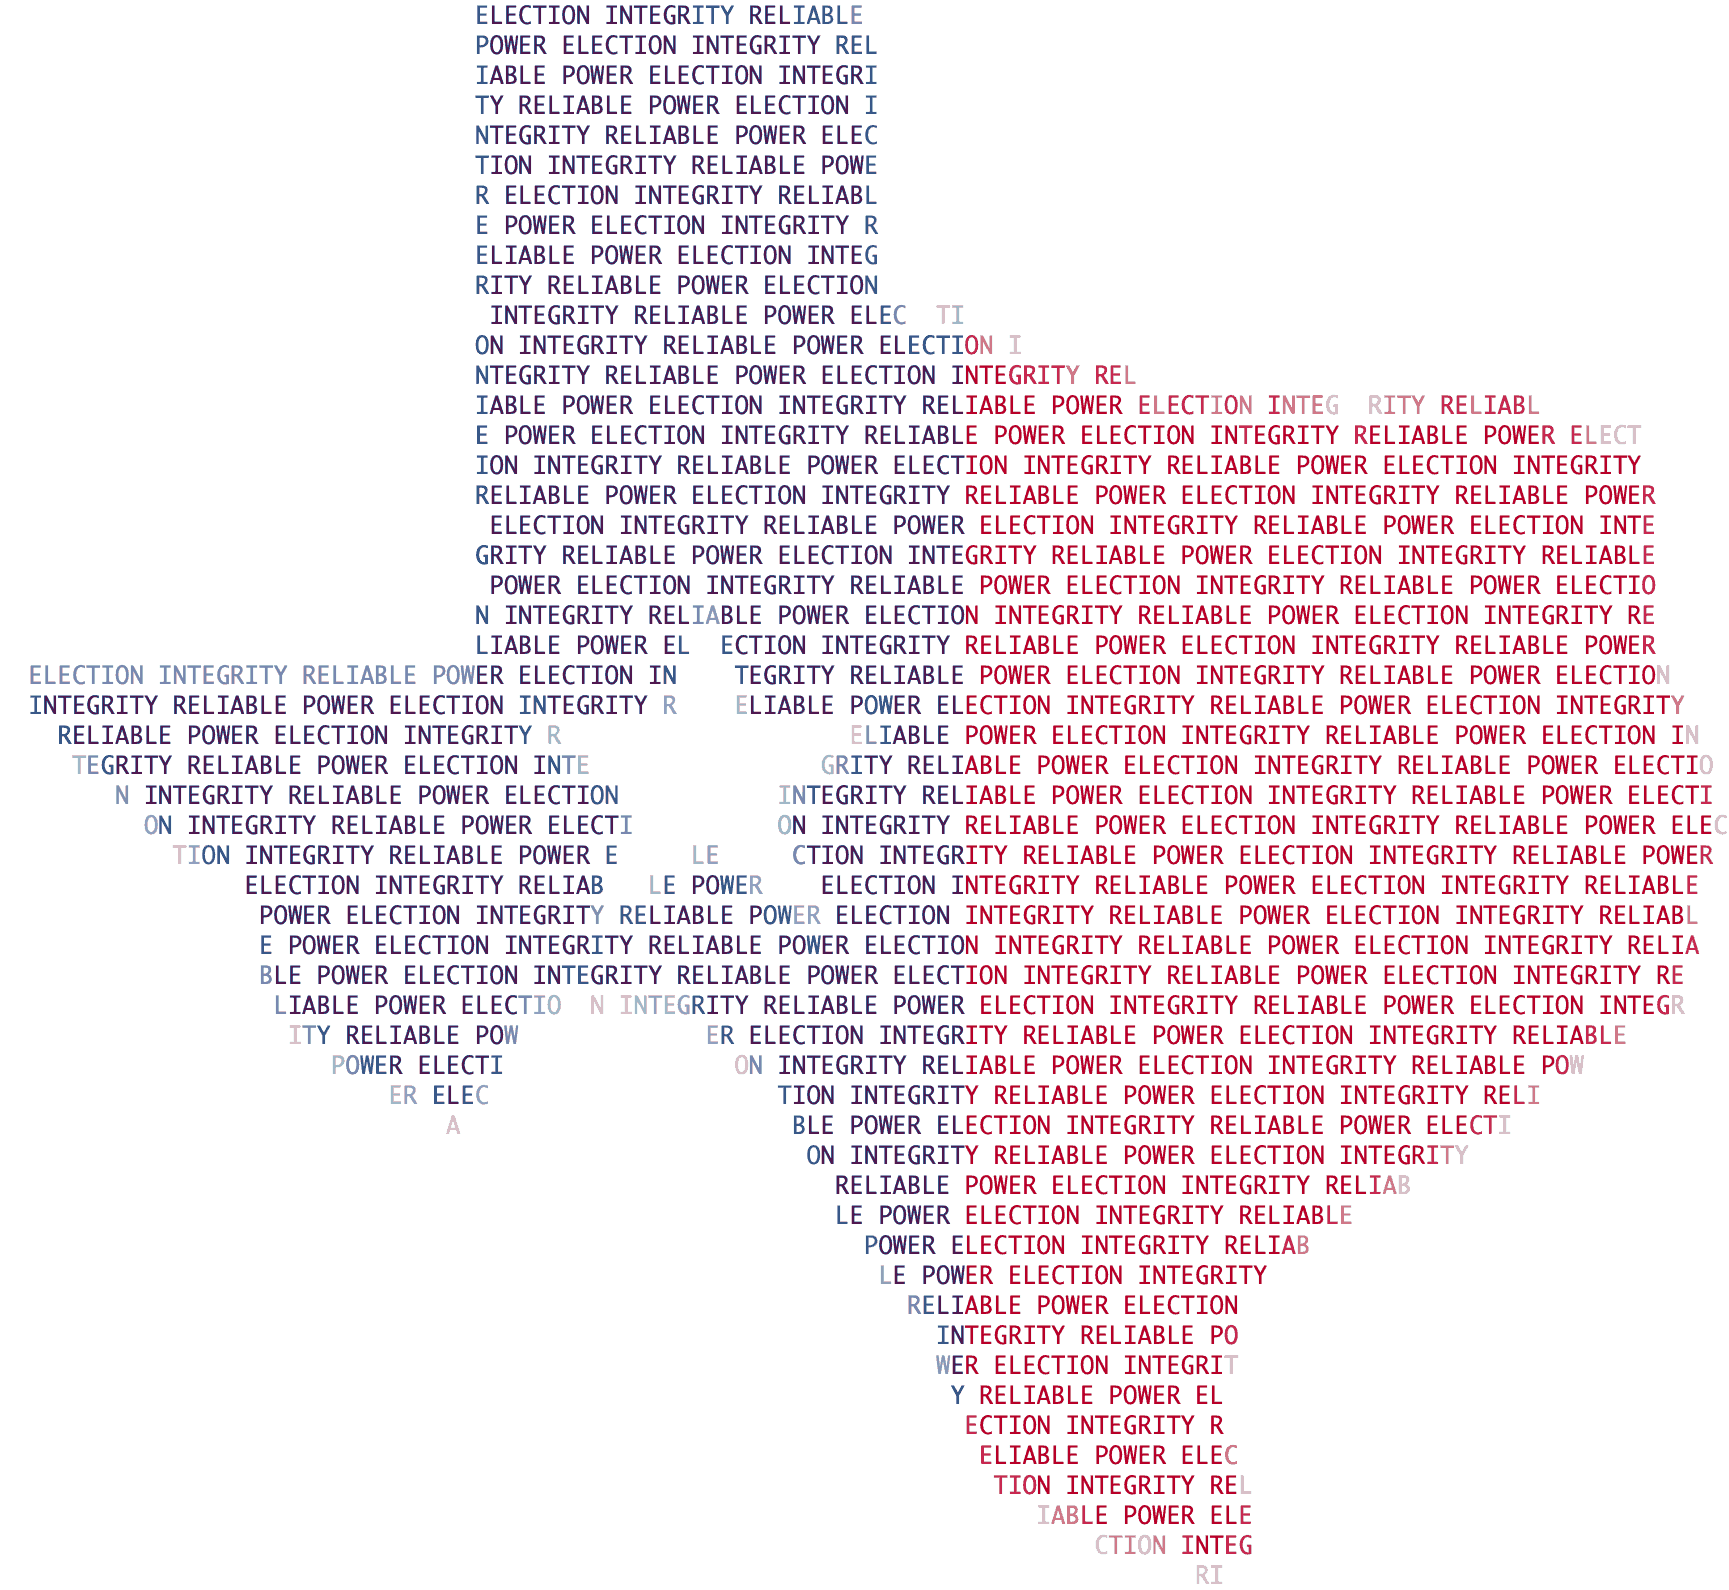 Texas Elections and Power: ASCII art of Texas with the phrase “ELECTION INTEGRITY” and “RELIABLE POWER”.; elections; Texas; energy policy